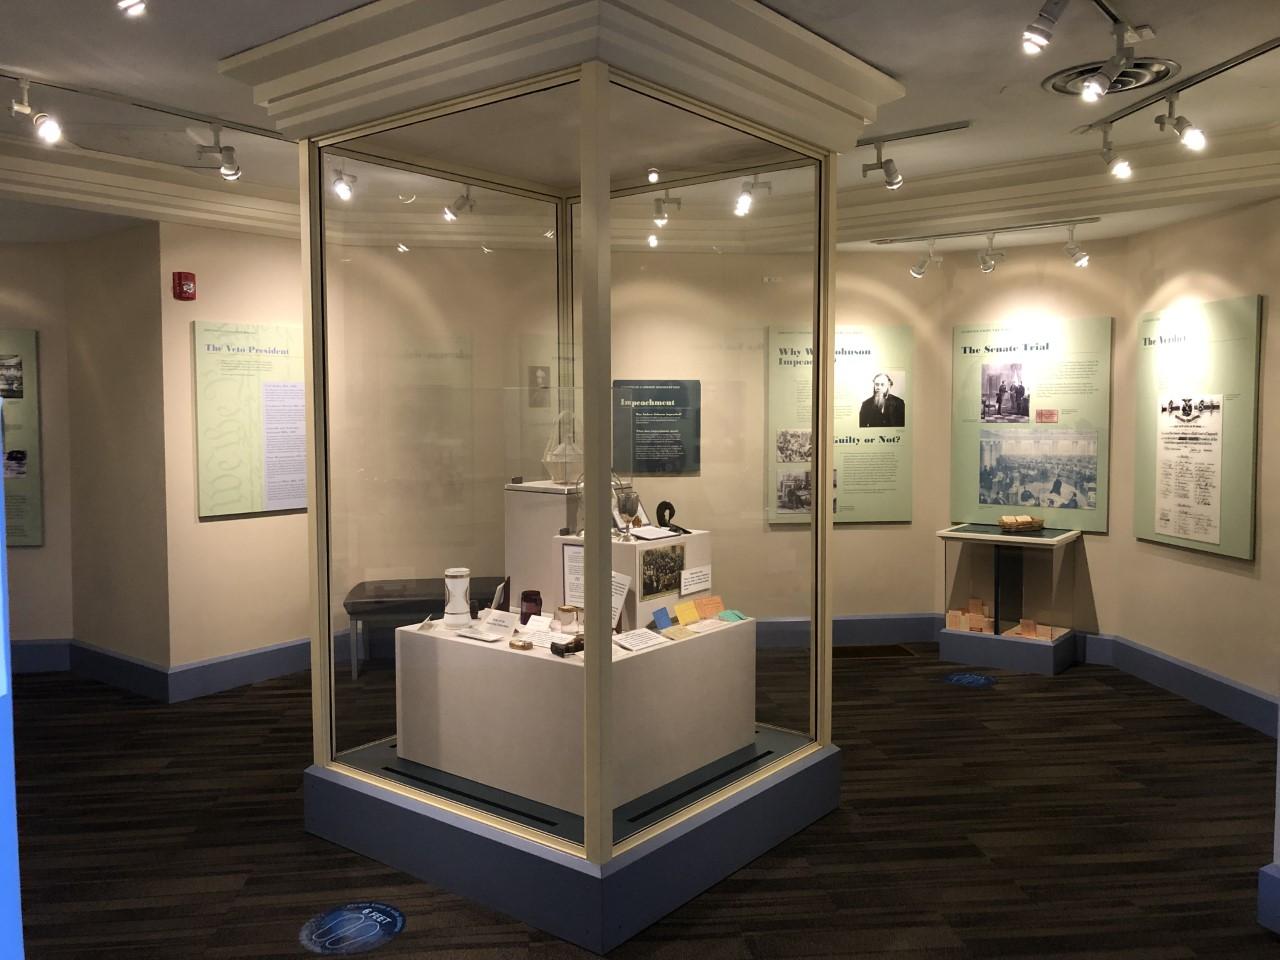 A view of the museum with center case and wall exhibits